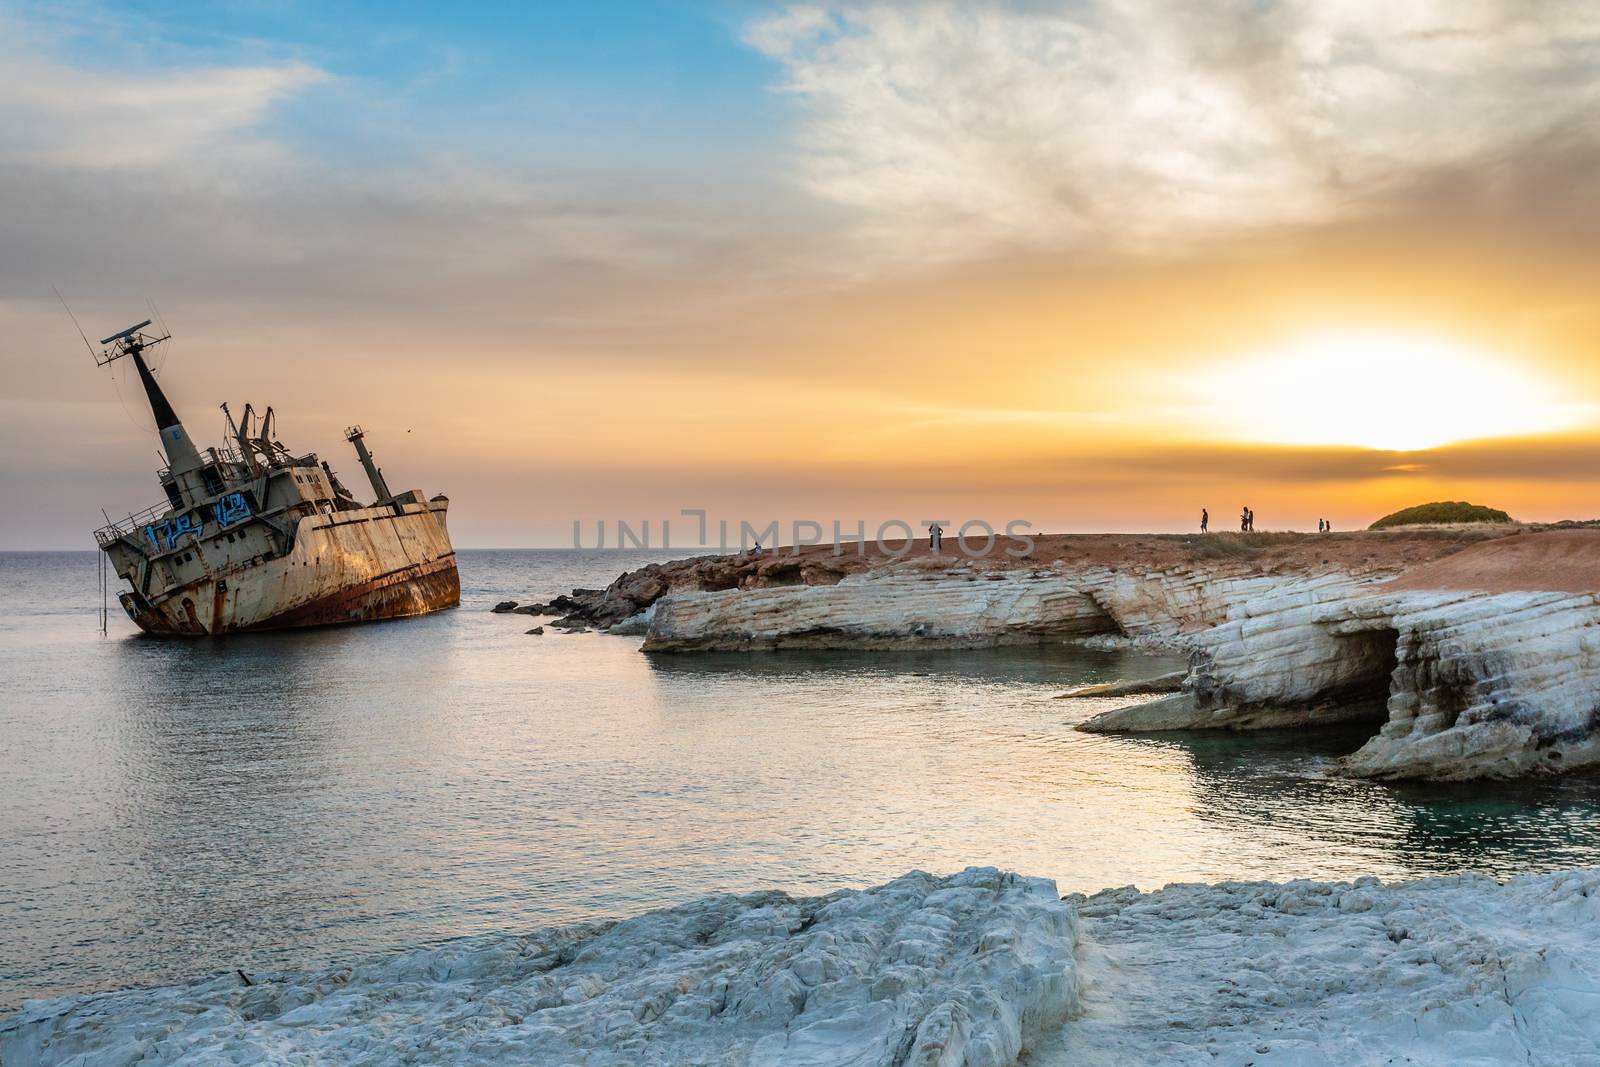 Abandoned rusty ship stranded ashore  in the sunset rays at Peyi by ambeon